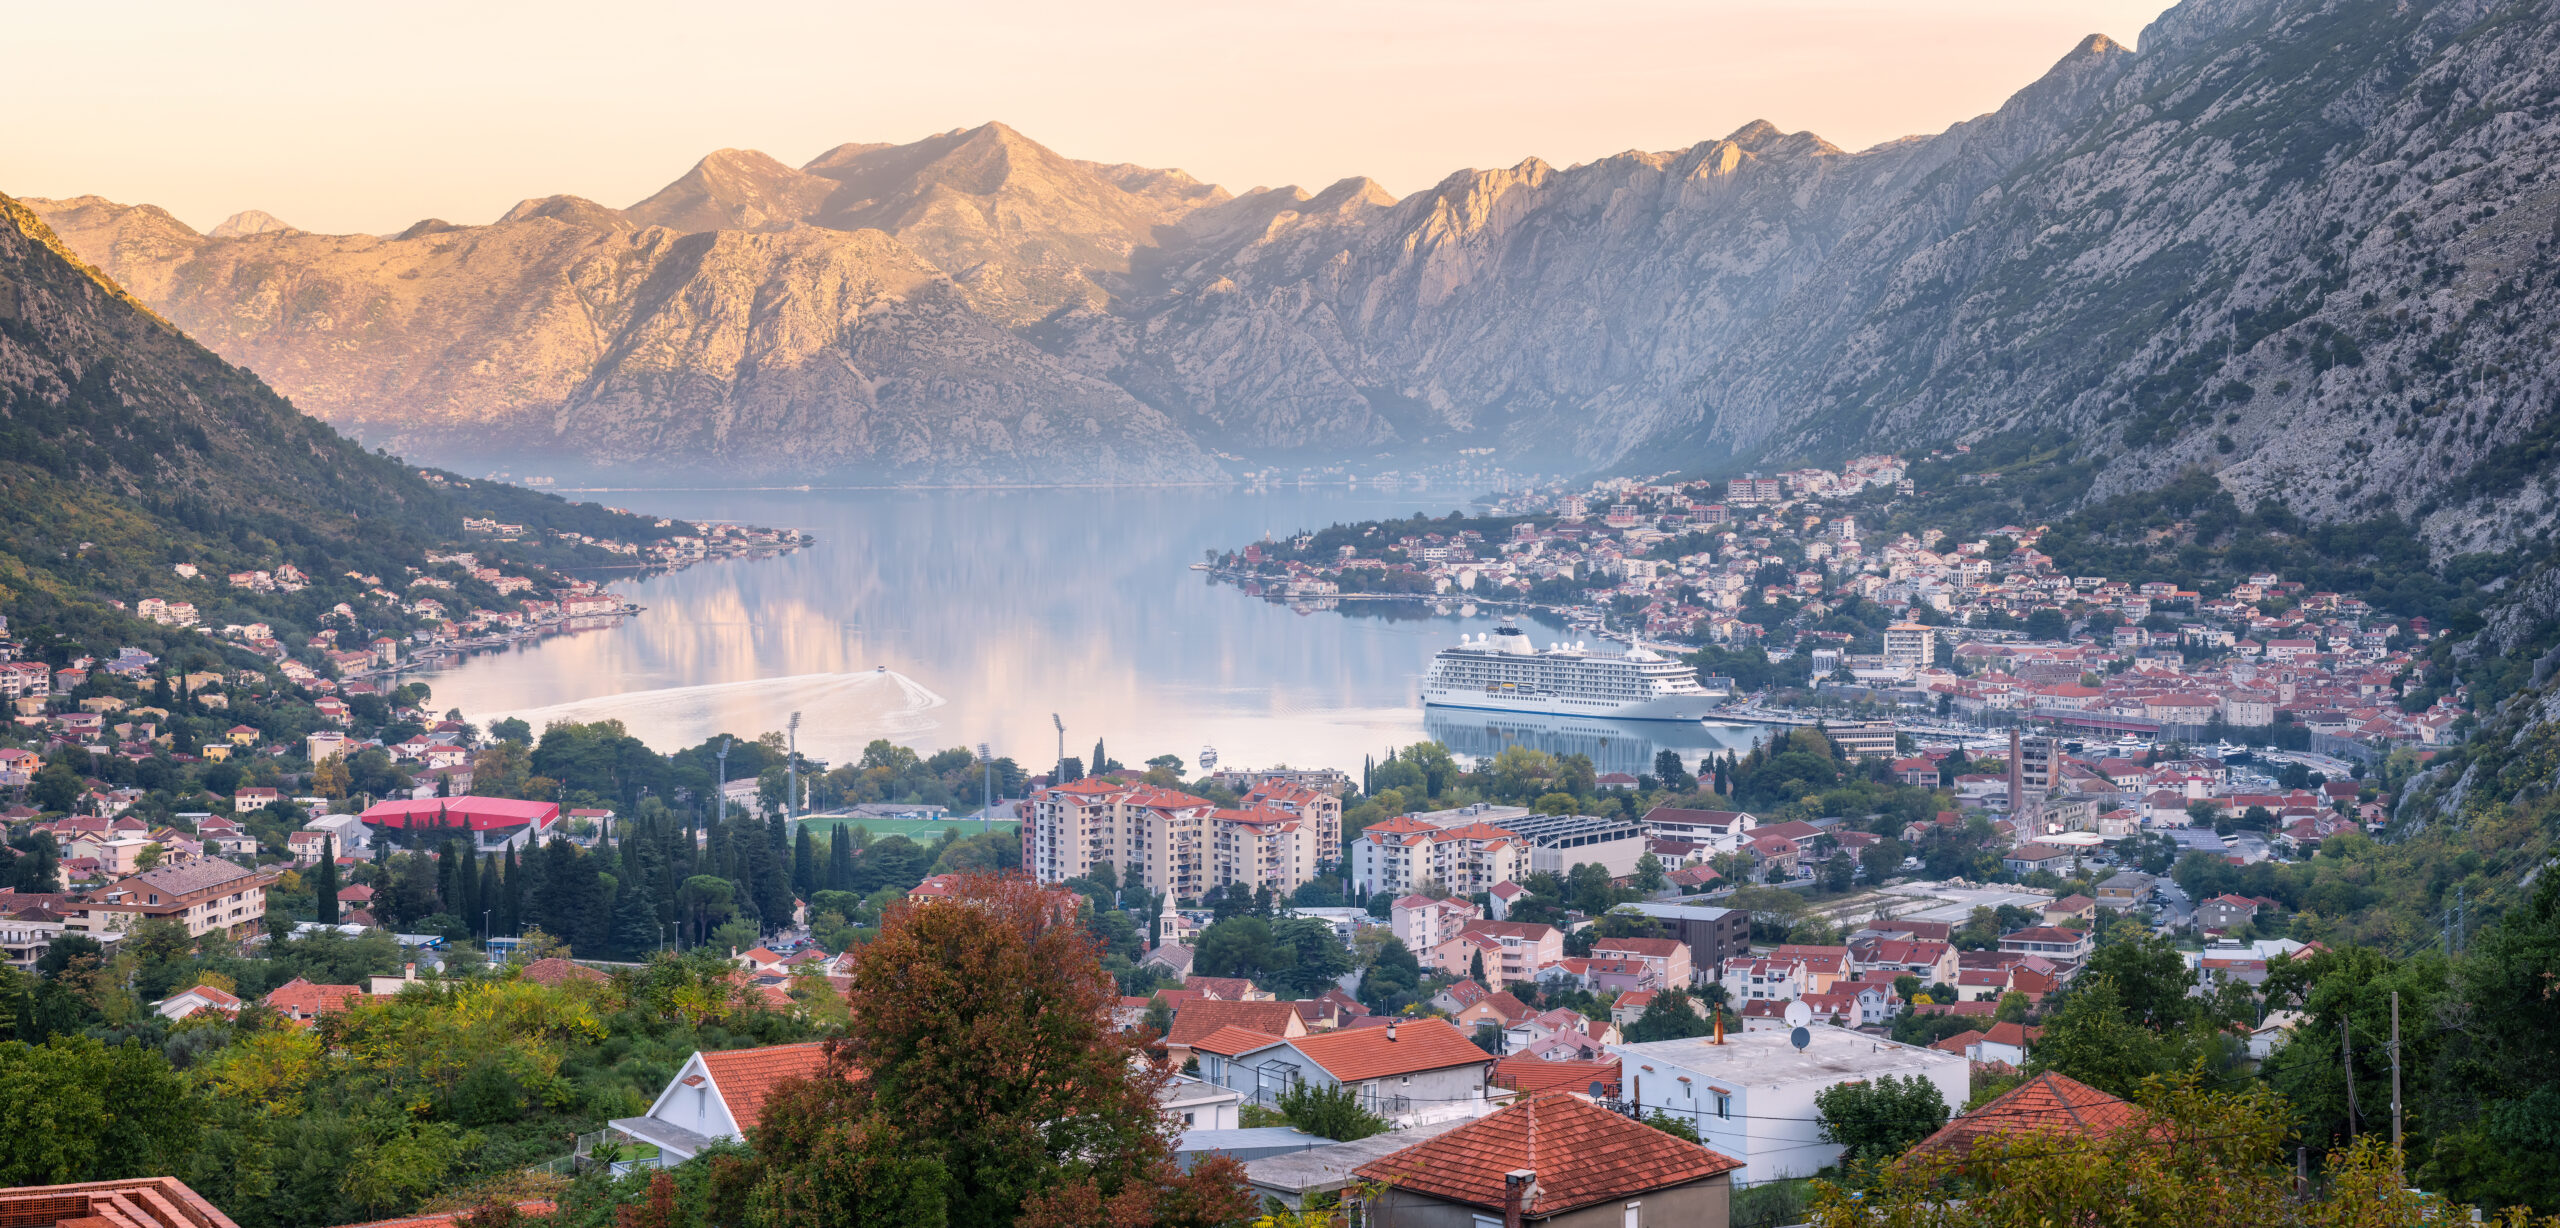 production-services-and-filming-in-montenegro-bay-between-picturesque-rocky-slopes